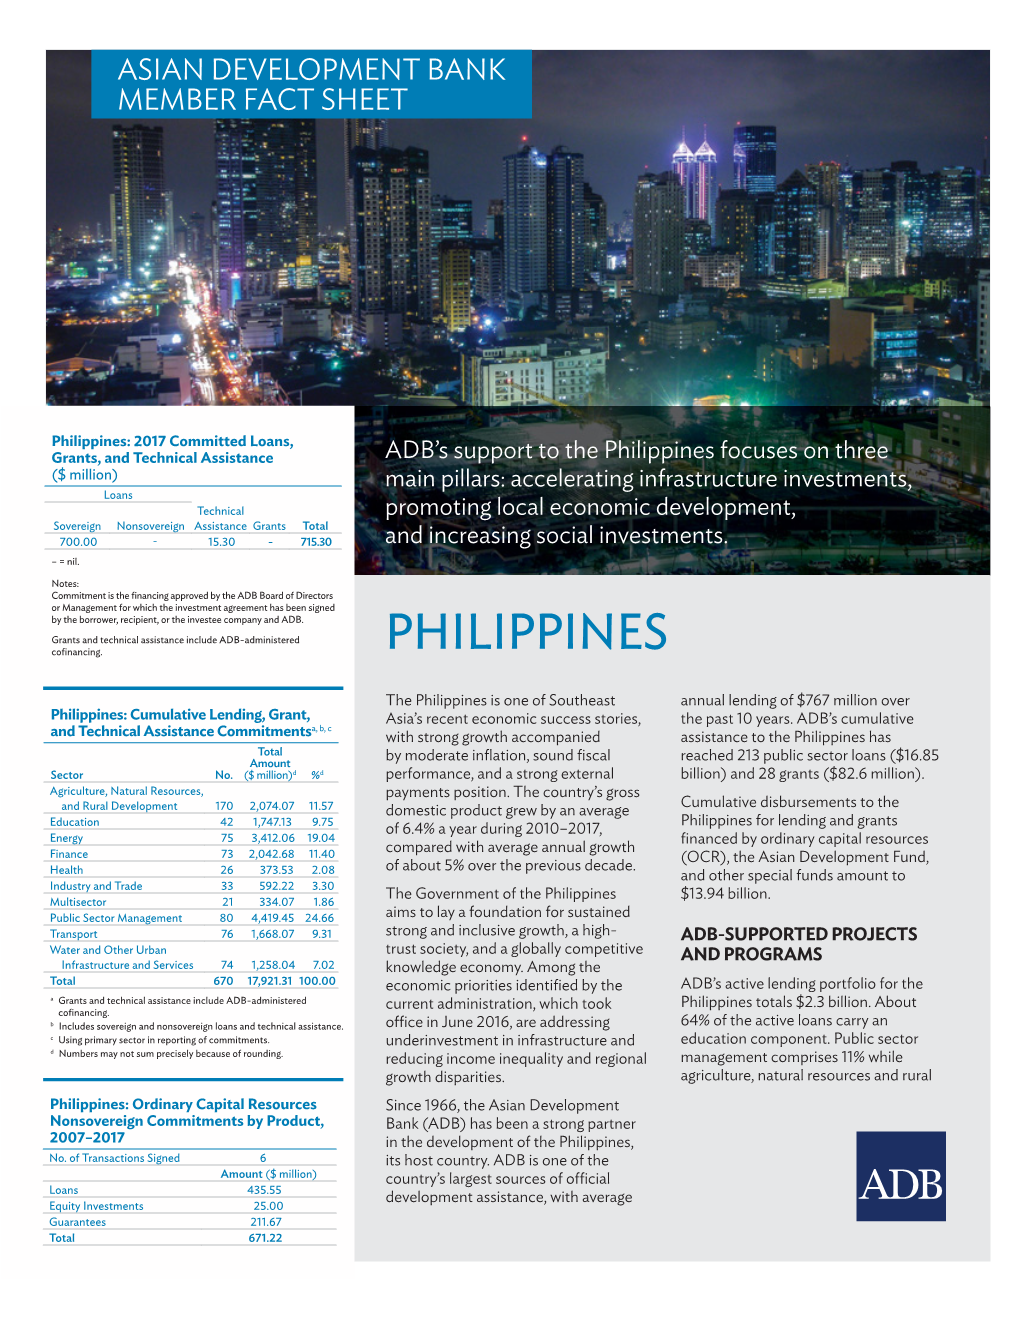 Asian Development Bank and Philippines